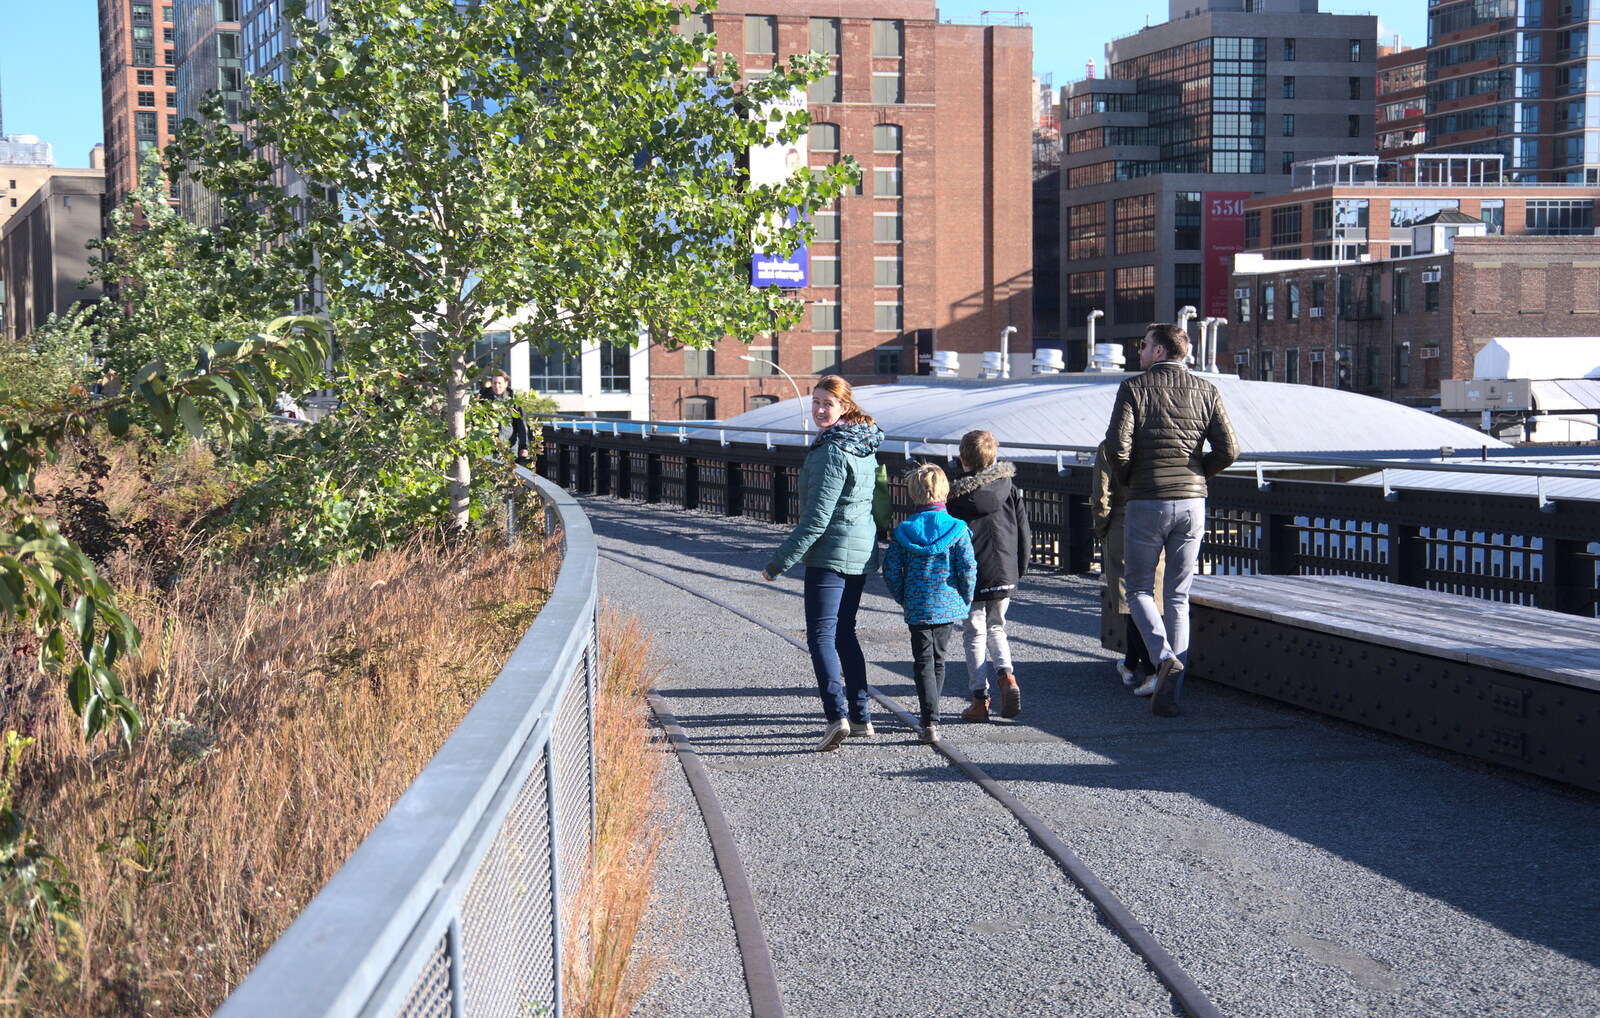 We head off down the High Line from Times Square, USS Intrepid and the High Line, Manhattan, New York - 25th October 2018